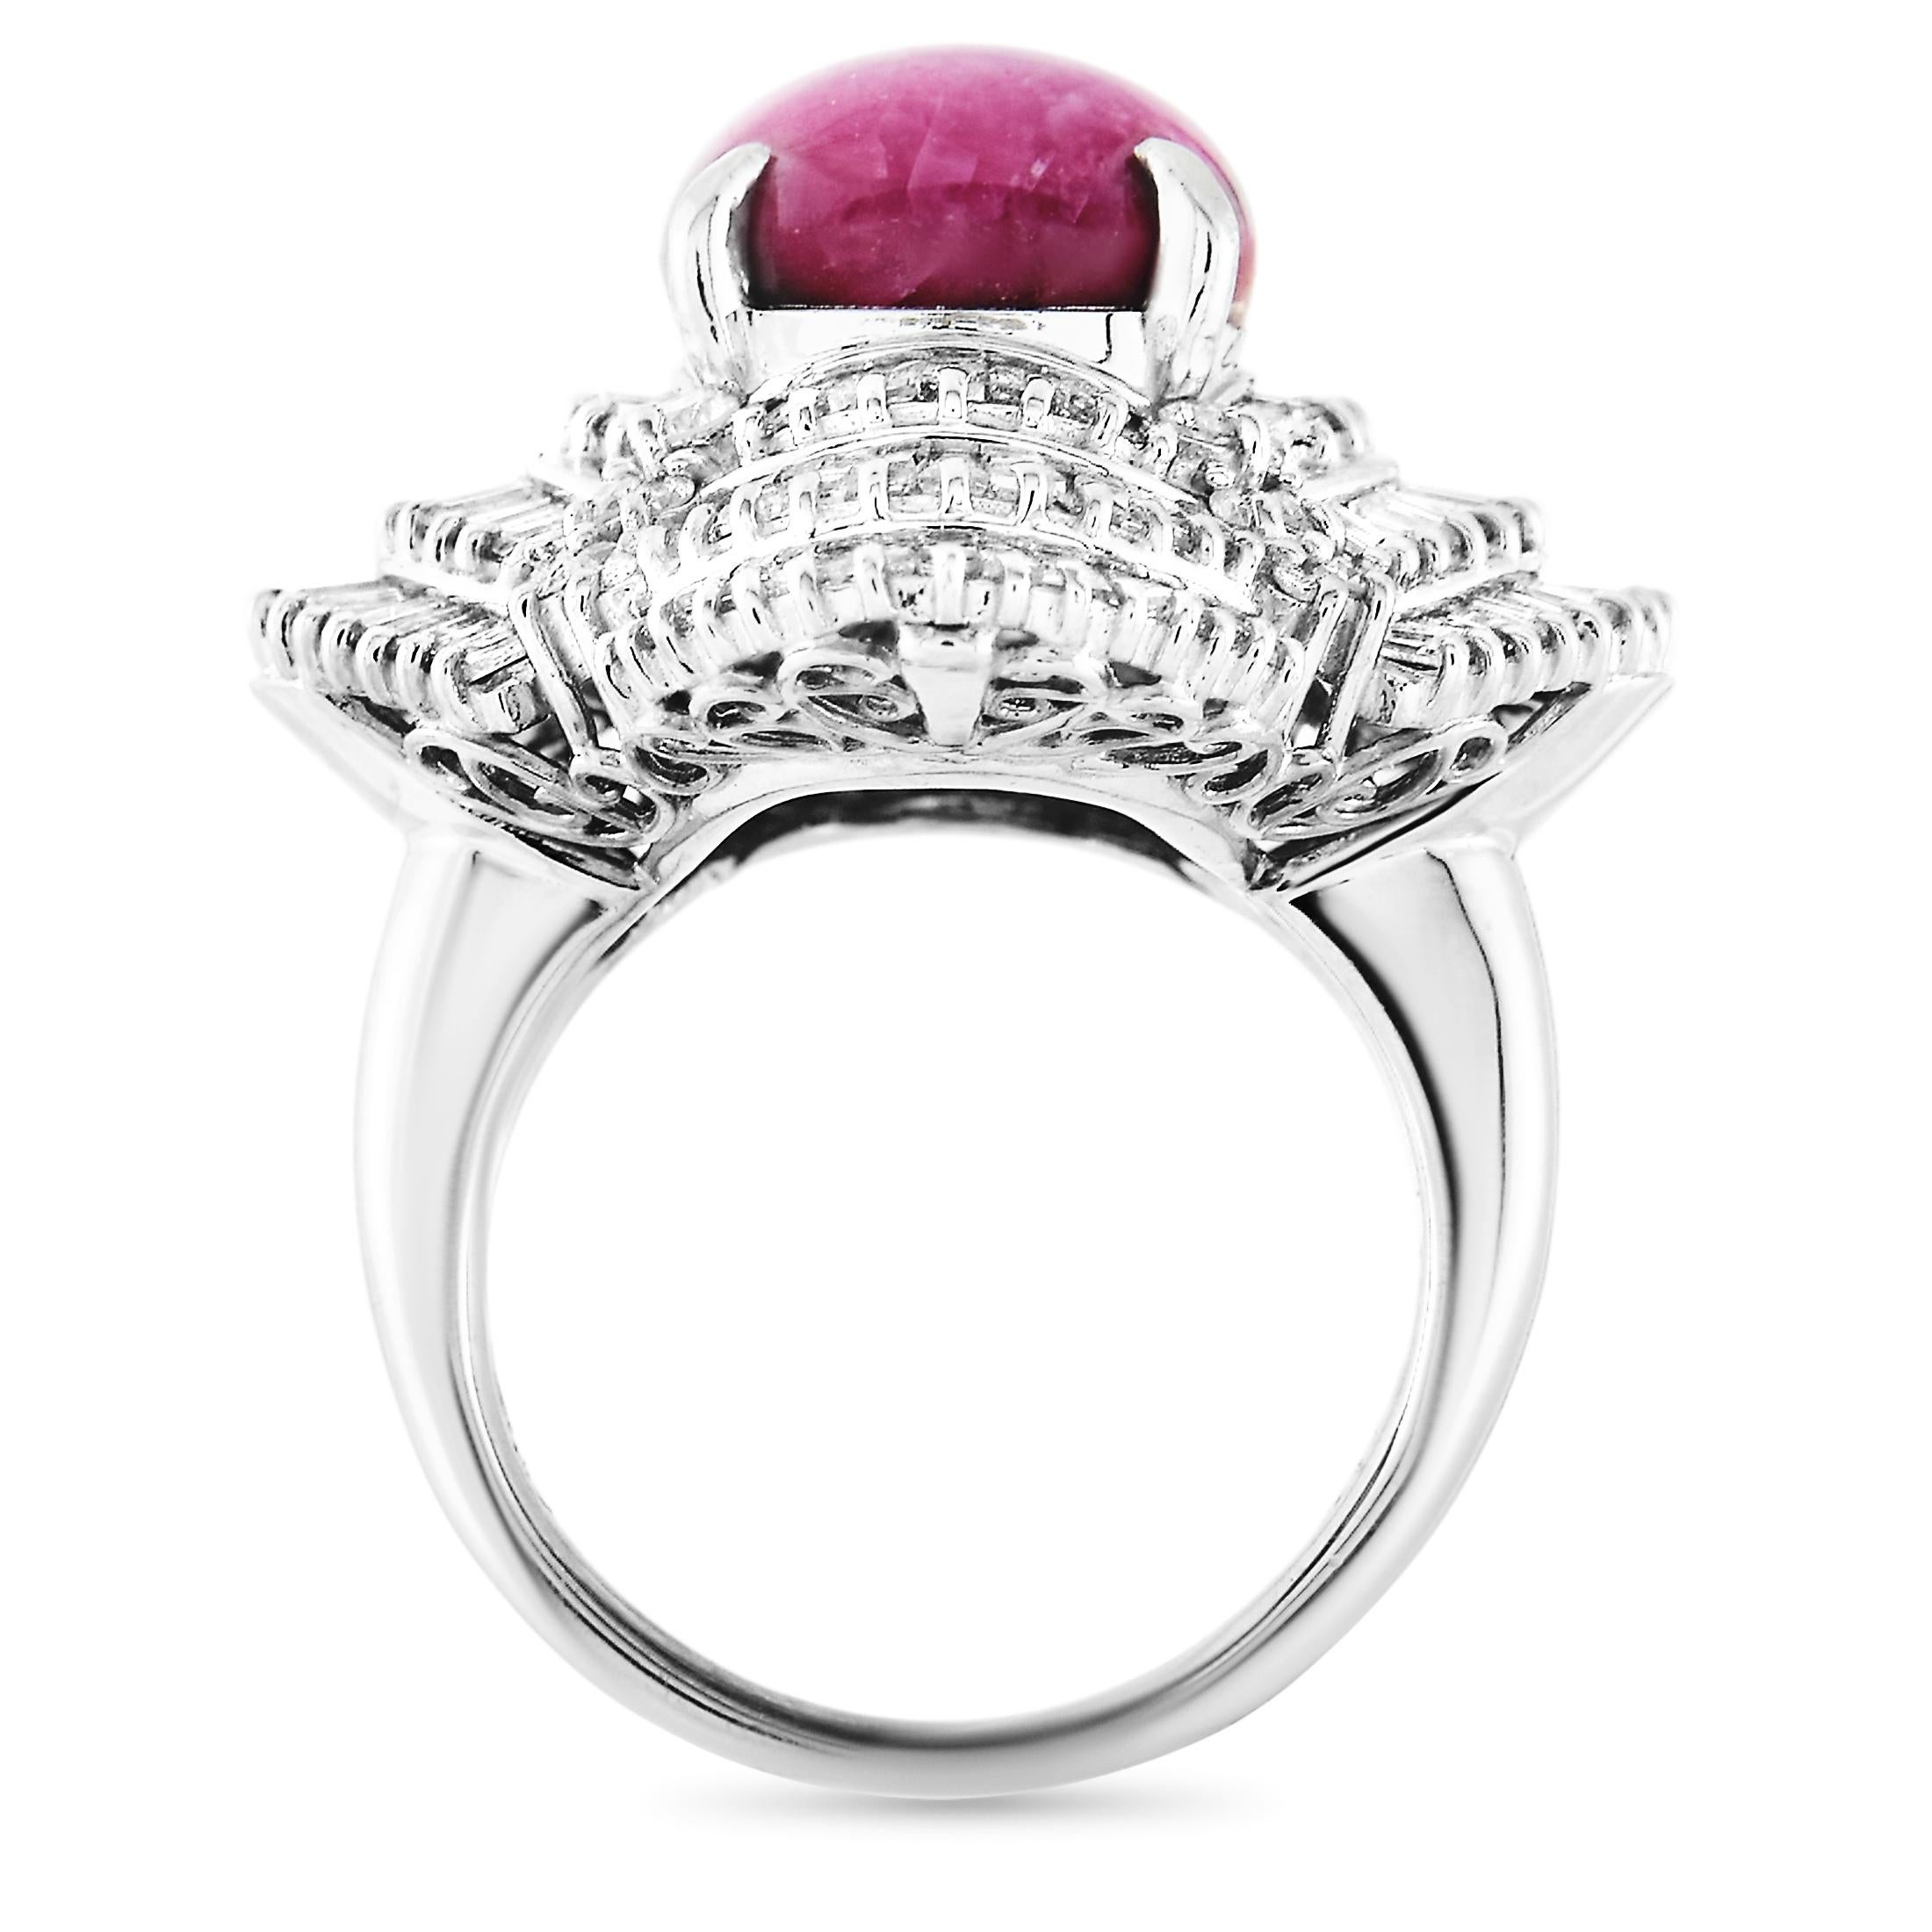 This LB Exclusive ring is made of platinum and embellished with a 12.32 ct ruby and a total of 4.10 carats of diamonds. The ring weighs 20.9 grams and boasts band thickness of 2.5 mm and top height of 14 mm, while top dimensions measure 23 by 27